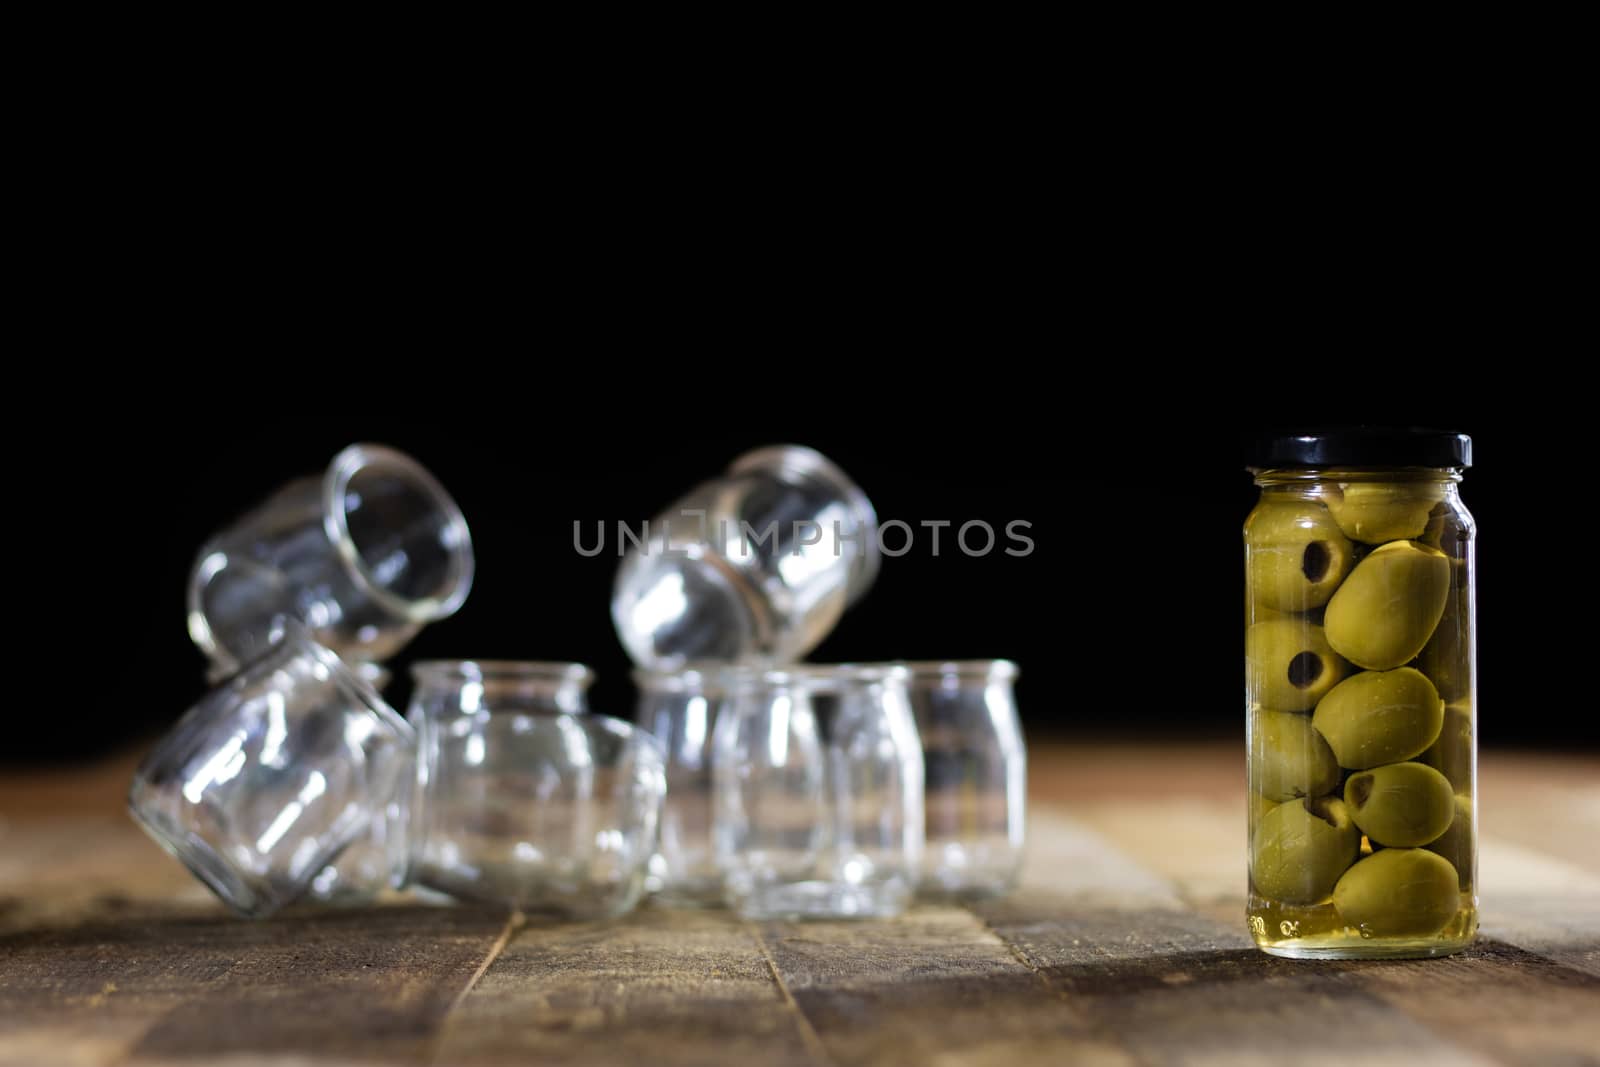 Mortar on a wooden table and empty jars, black background